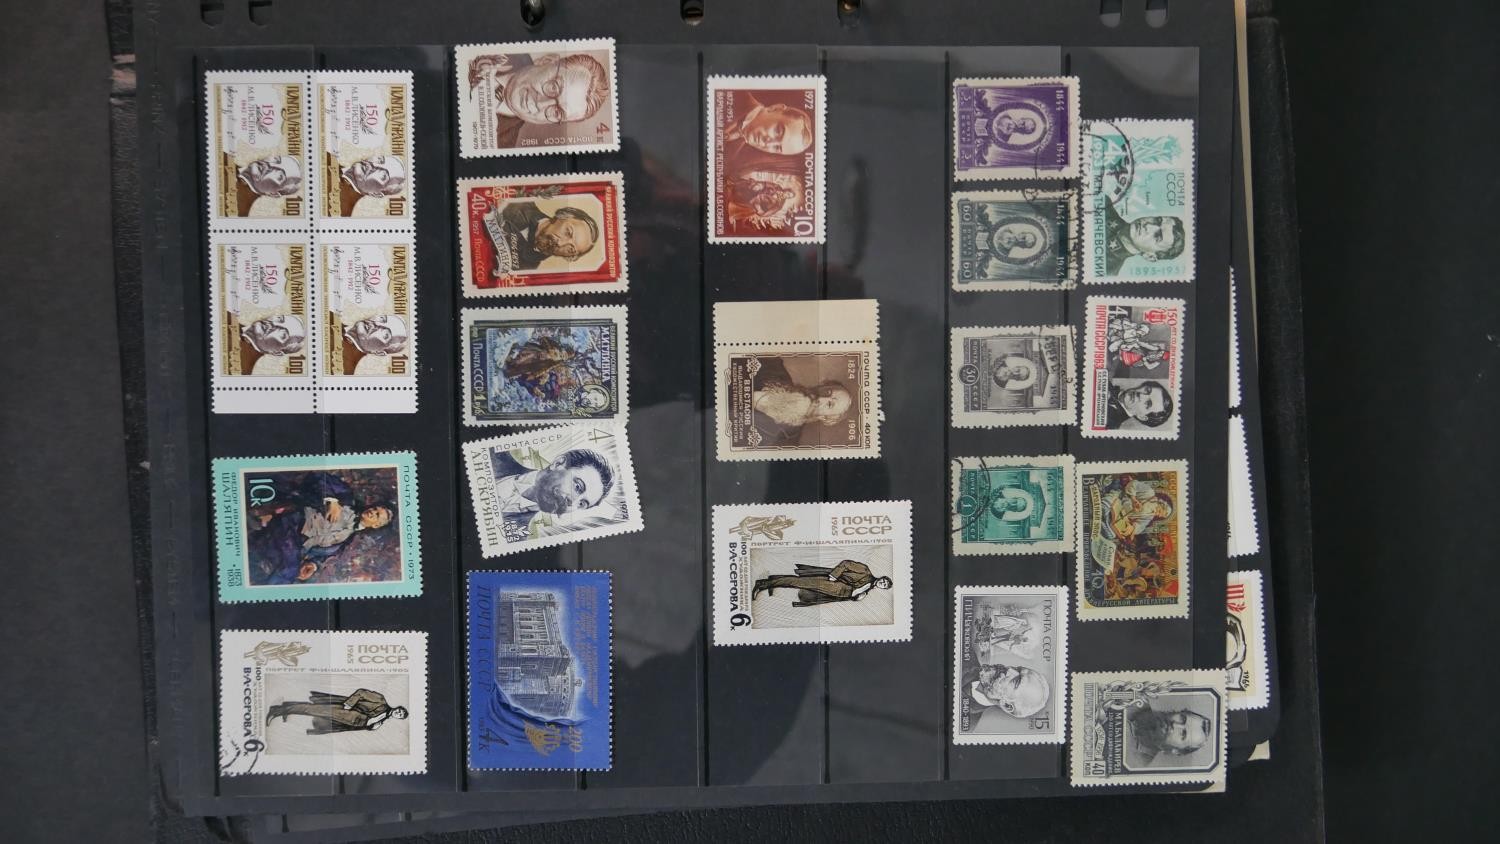 An album of world stamps along with a British Collecta coin album filled with various British coins. - Image 6 of 15